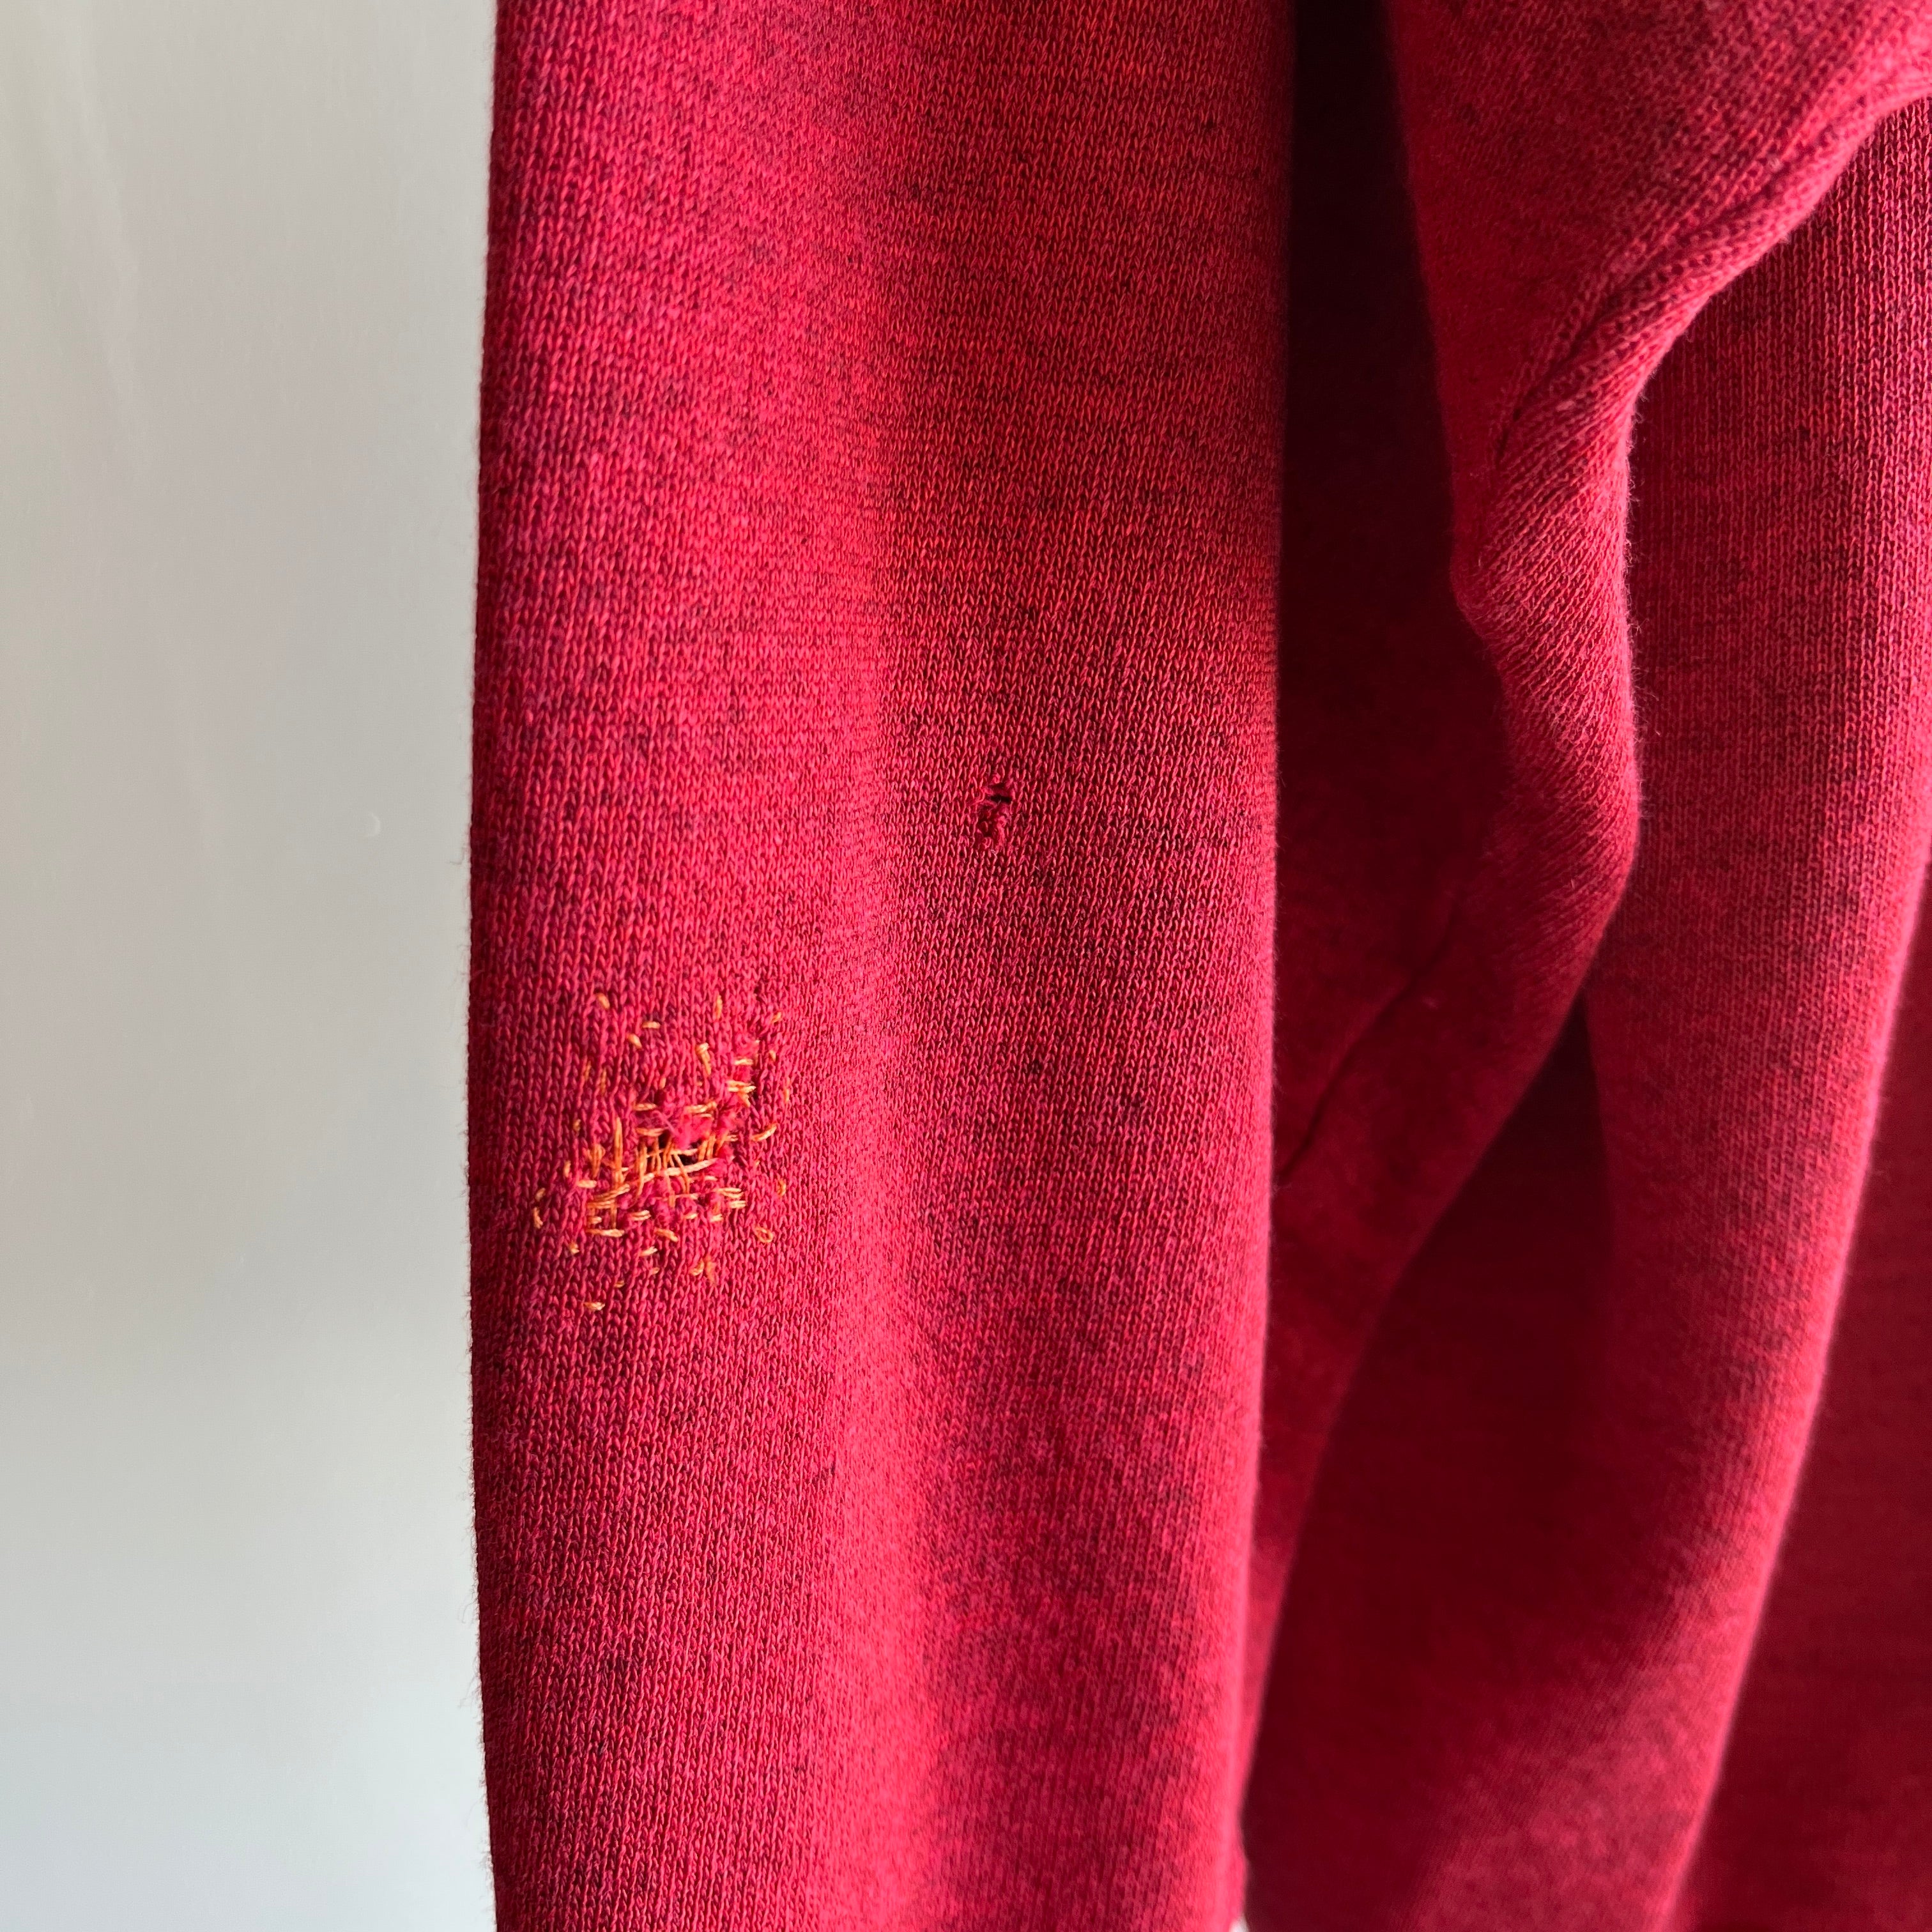 1980s Heather Red Sweatshirt with the Sweetest Mending by HHW